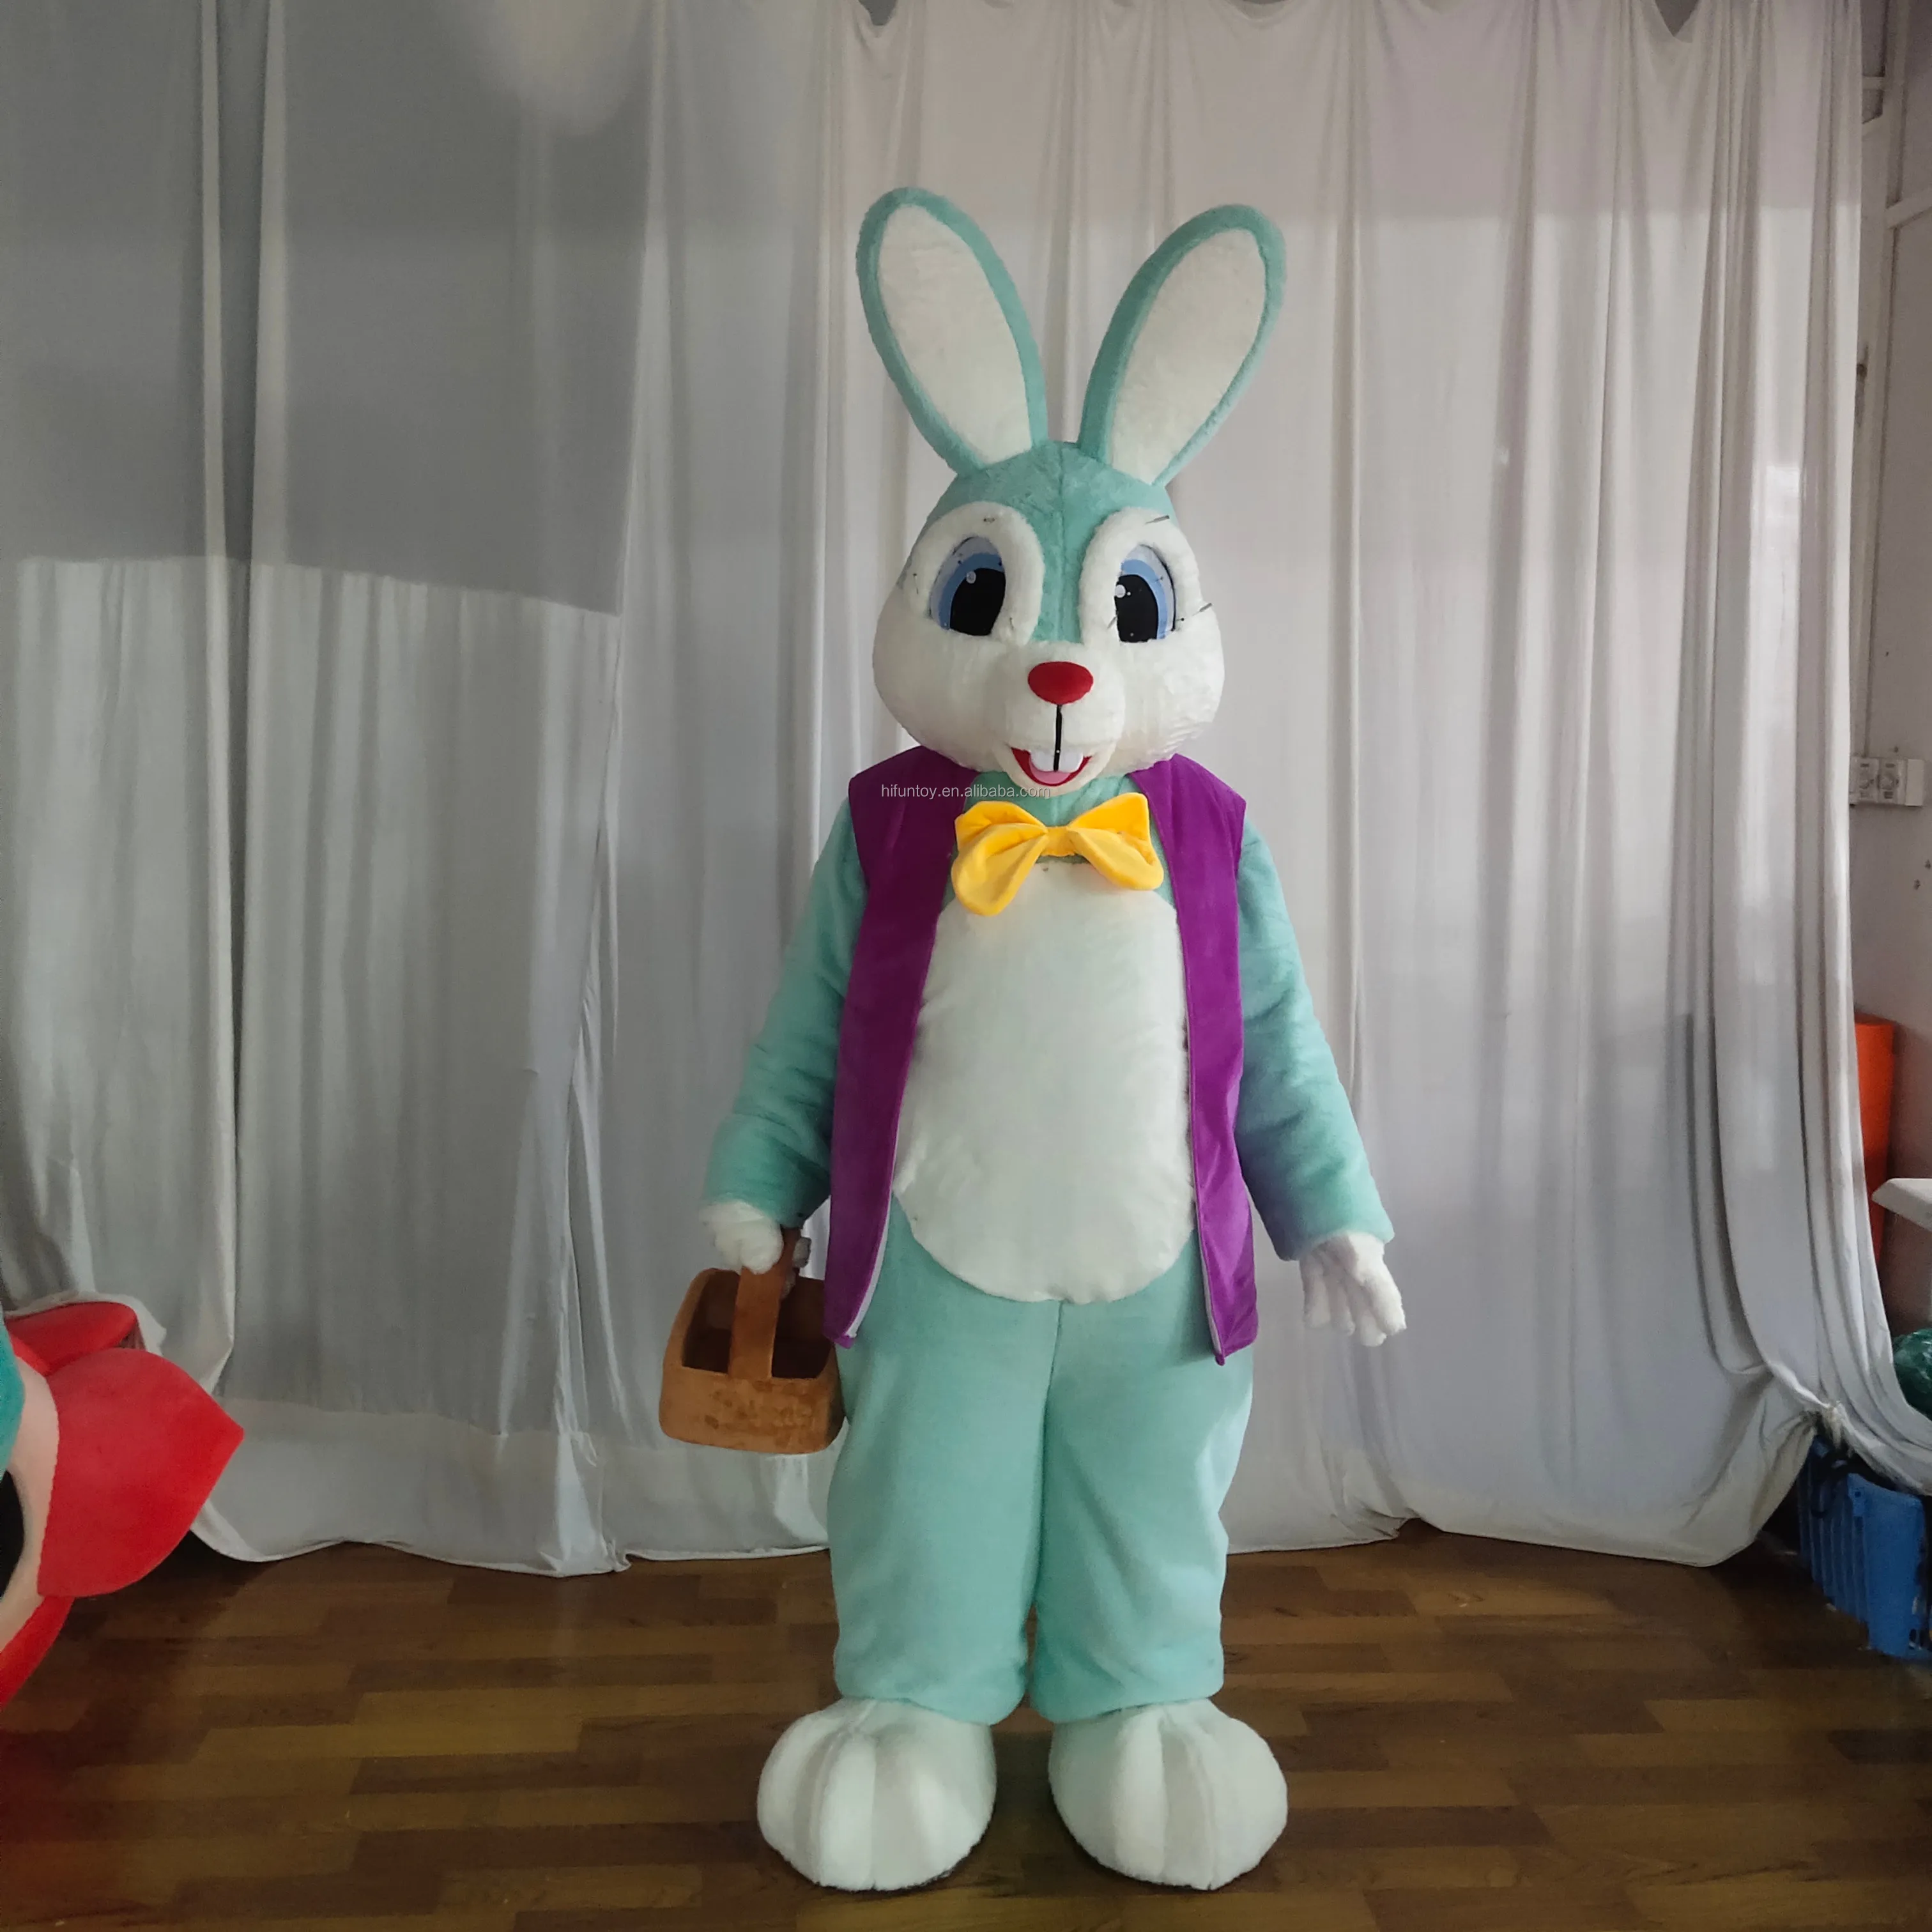 Bunny Mascot Easter Rabbit Costume Adult Fancy Dress White Adult Easter Bunny Mascot Walking Costume For Halloween Party Event